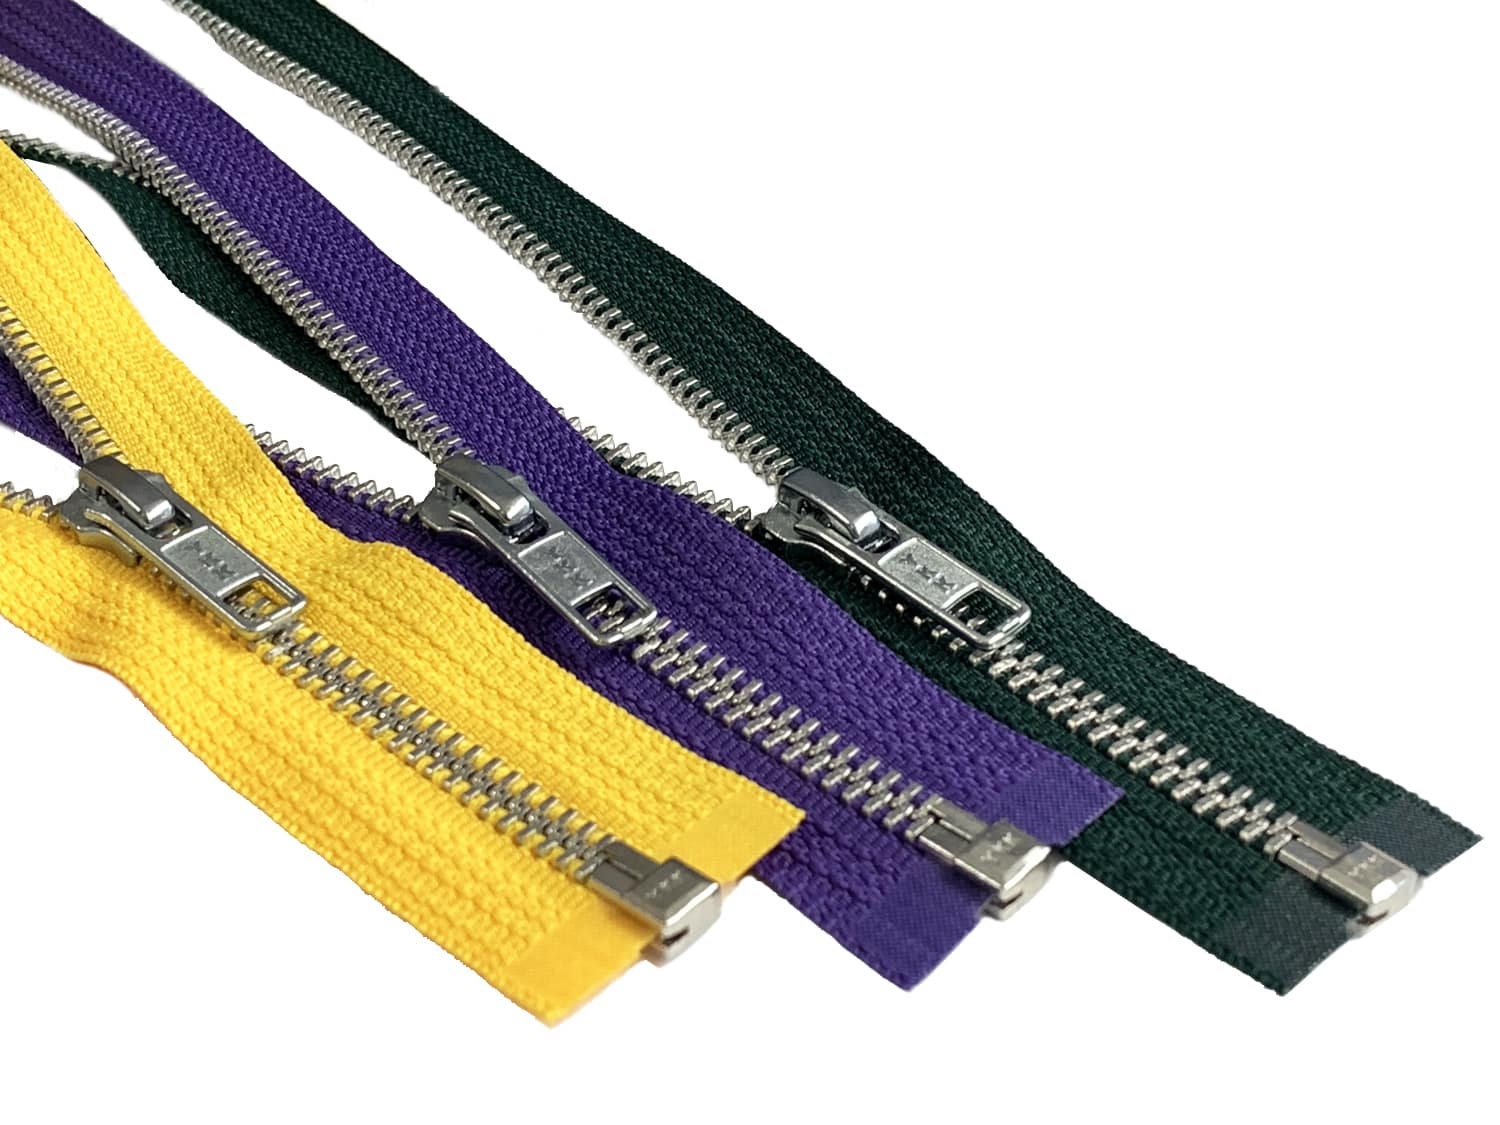 YKK 10 4 to 36 Aluminum Heavy Duty Metal Coats Jacket Zipper Separating  Made in the United States Choice of Color Length 